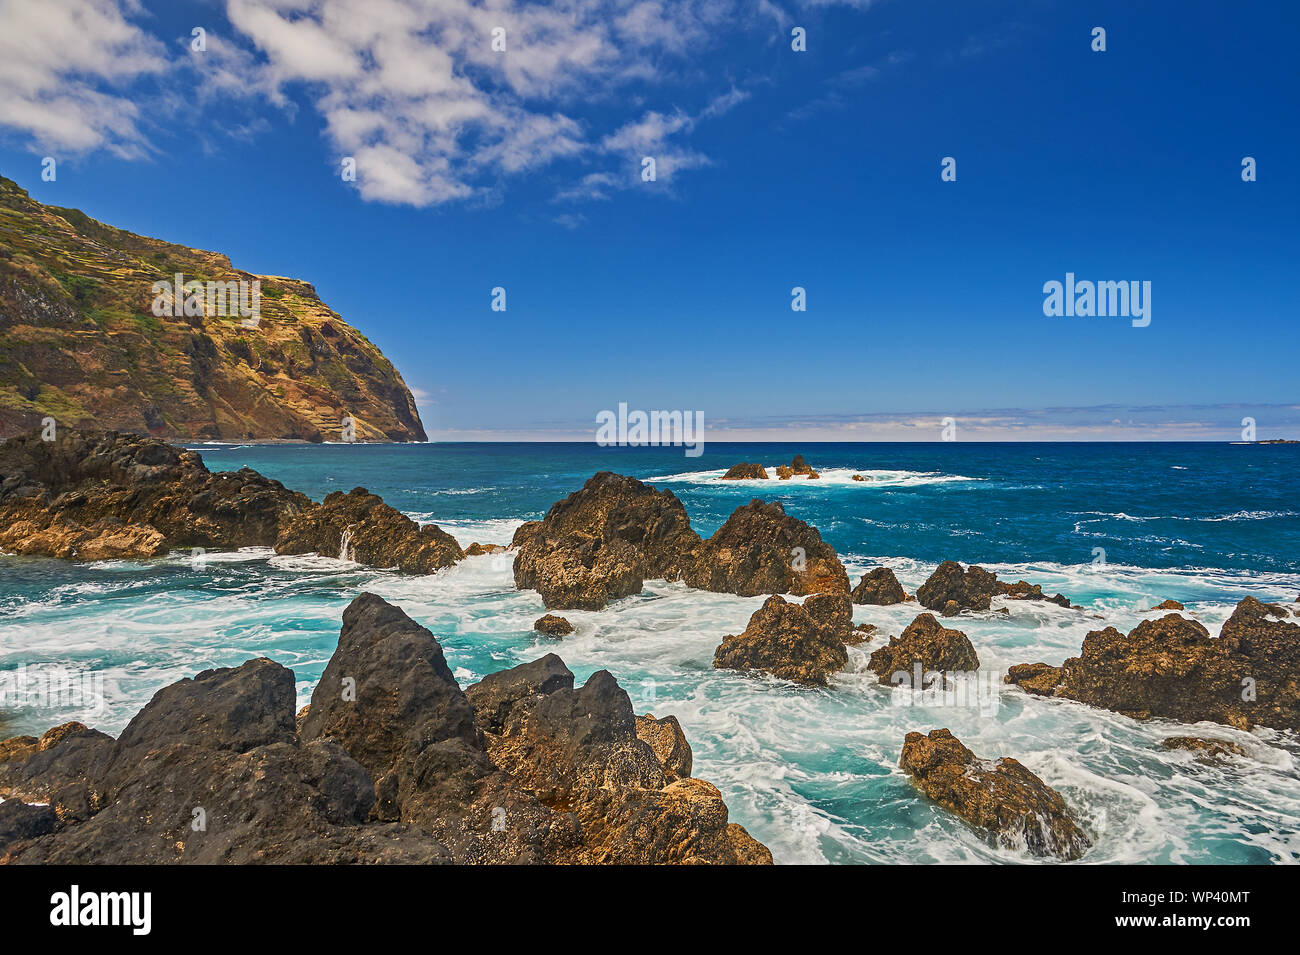 Atlantic Ocean and rugged volcanic coastline of northern Madeira at Porto Moniz, with waves breaking on rocks and shoreline. Stock Photo